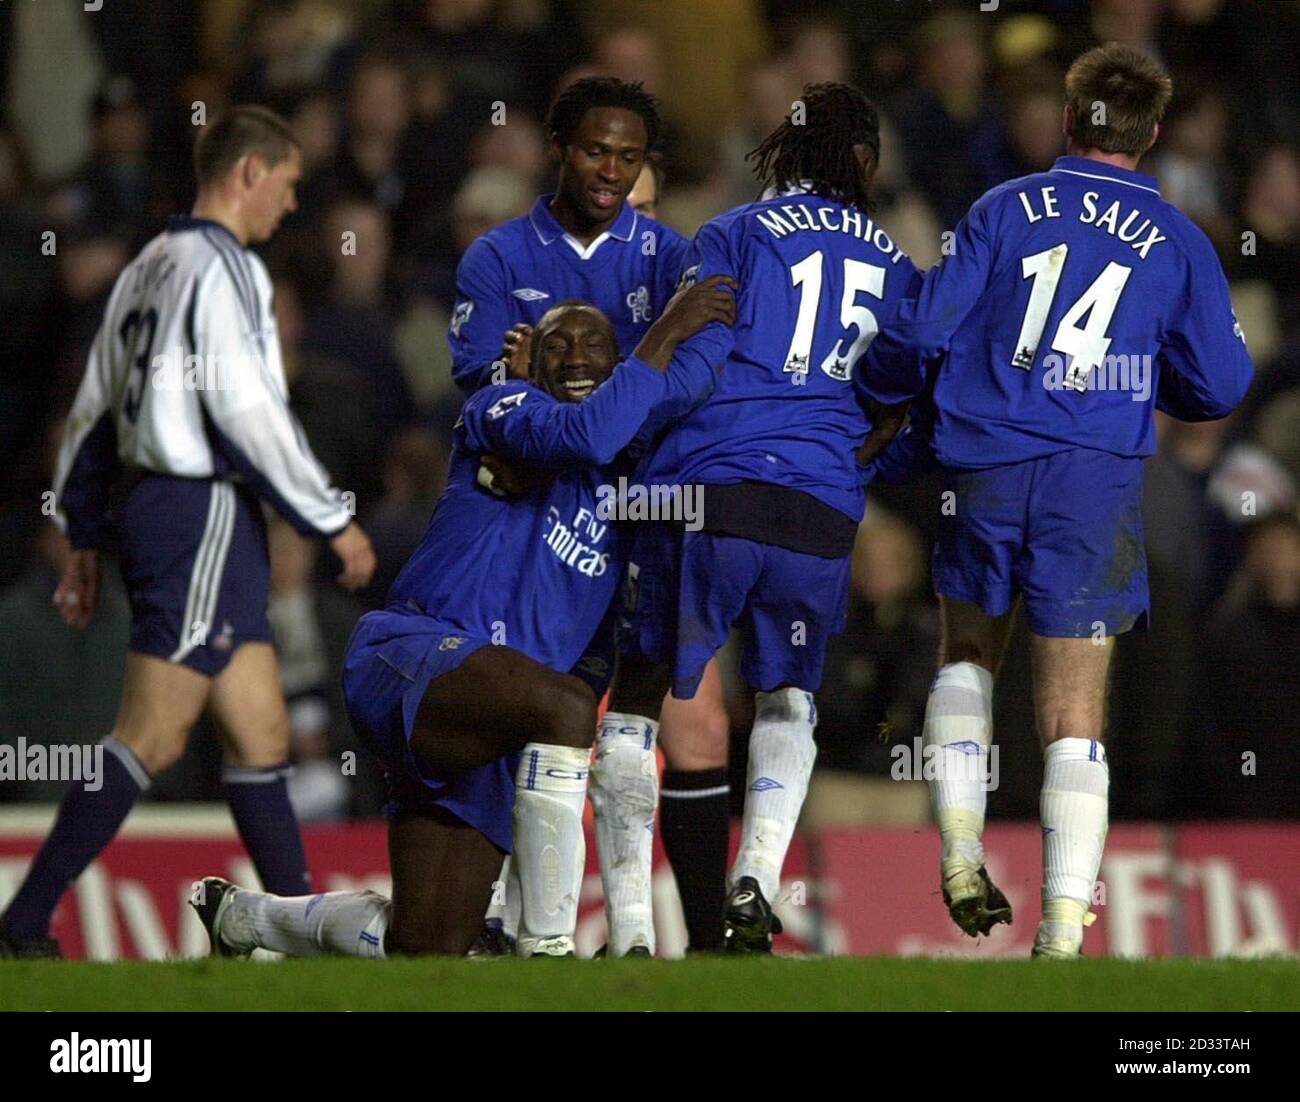 Chelsea's Jimmy Floyd Hasselbaink is helped to his feet after scoring his hat-trick goal against Tottenham Hotspur, during their FA Barclaycard Premiership match at Stamford Bridge. Stock Photo